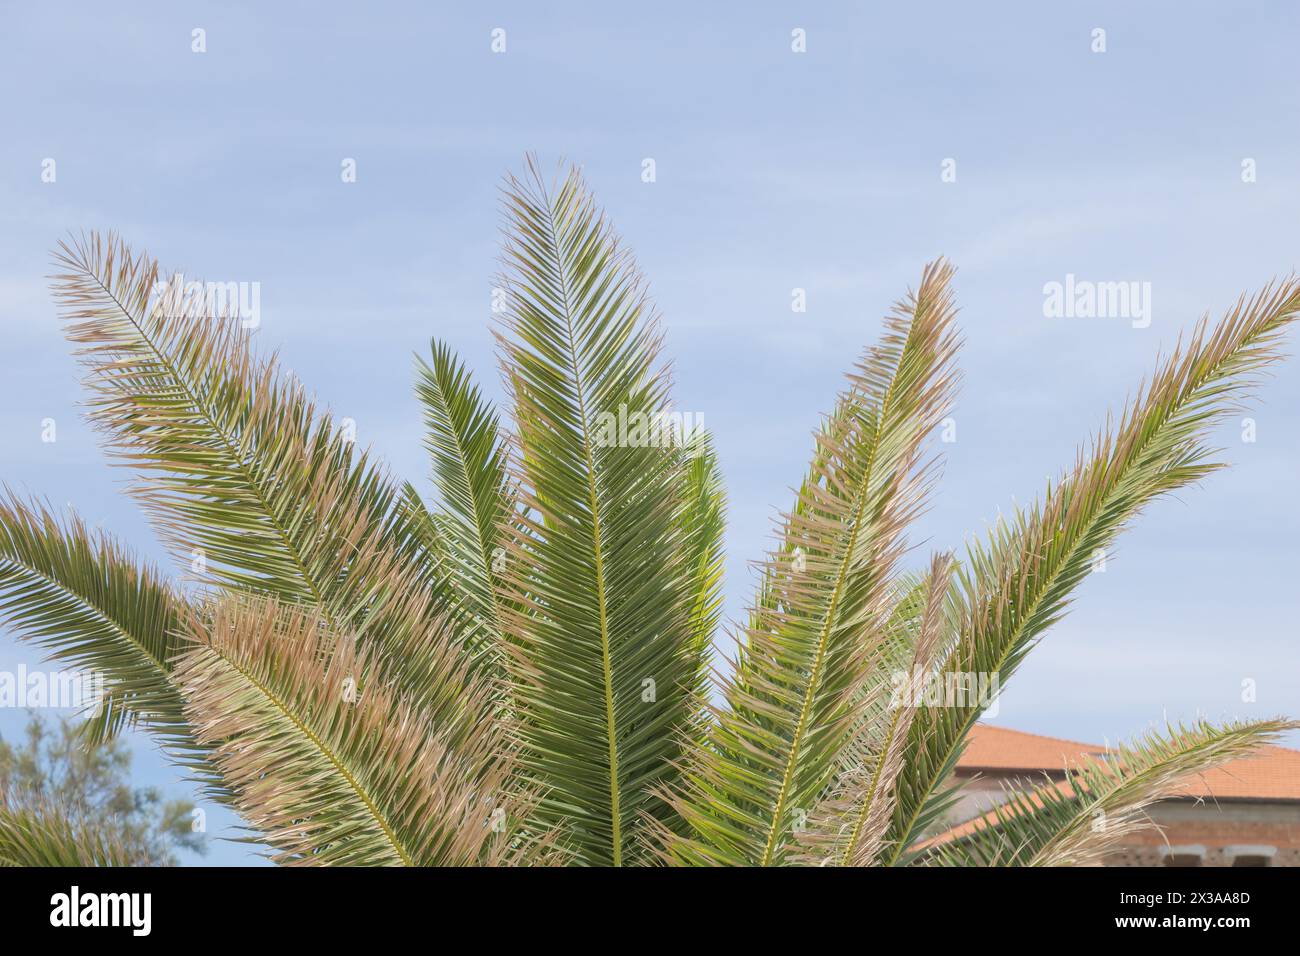 A closeup of the leaves and fronds on an African palm tree, with its branches reaching towards the sky. Stock Photo